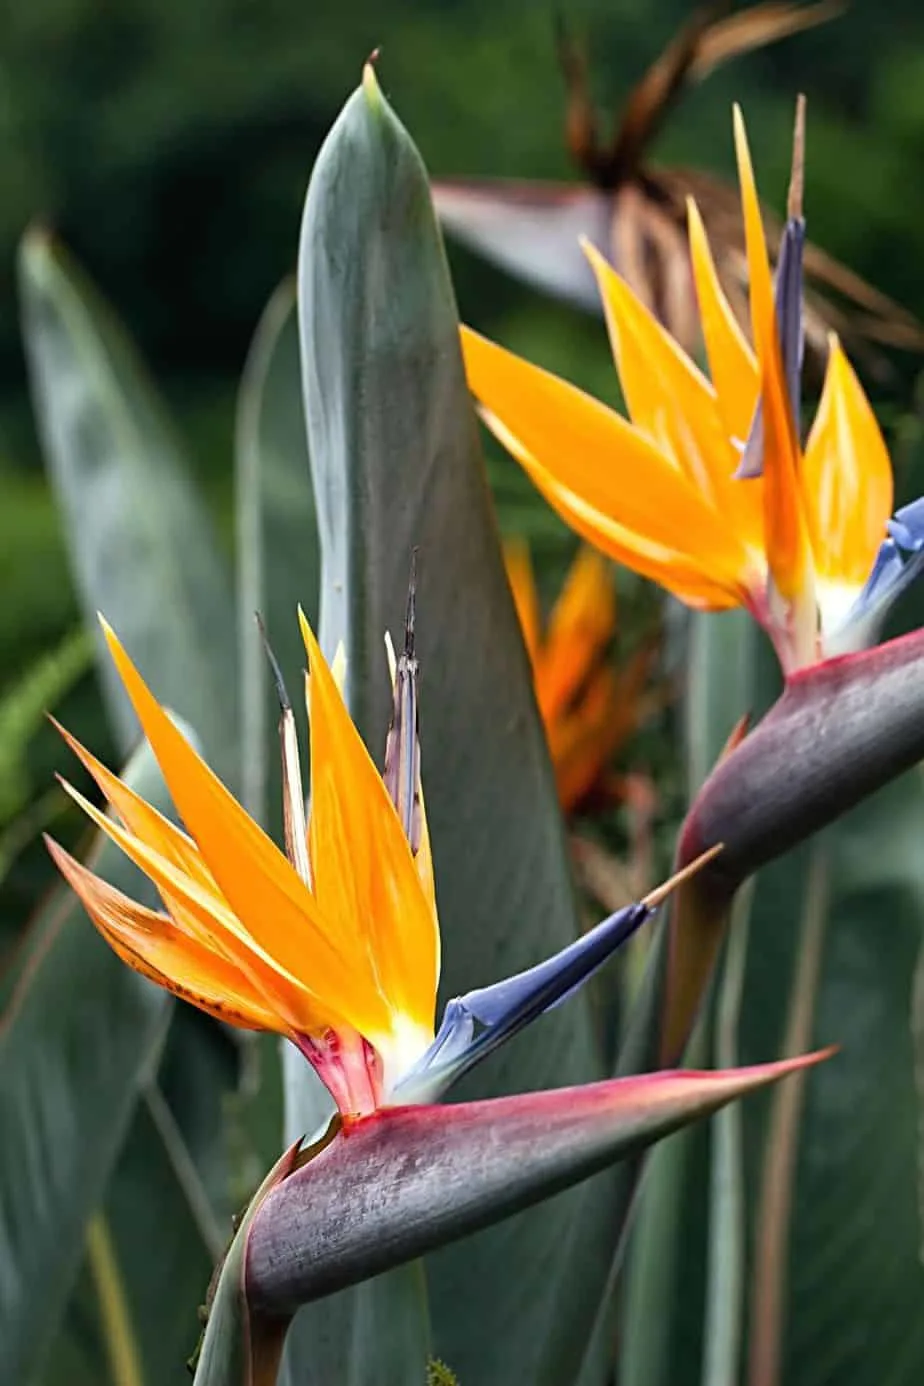 Despite being a colorful plant, the Bird of Paradise can be grown for privacy